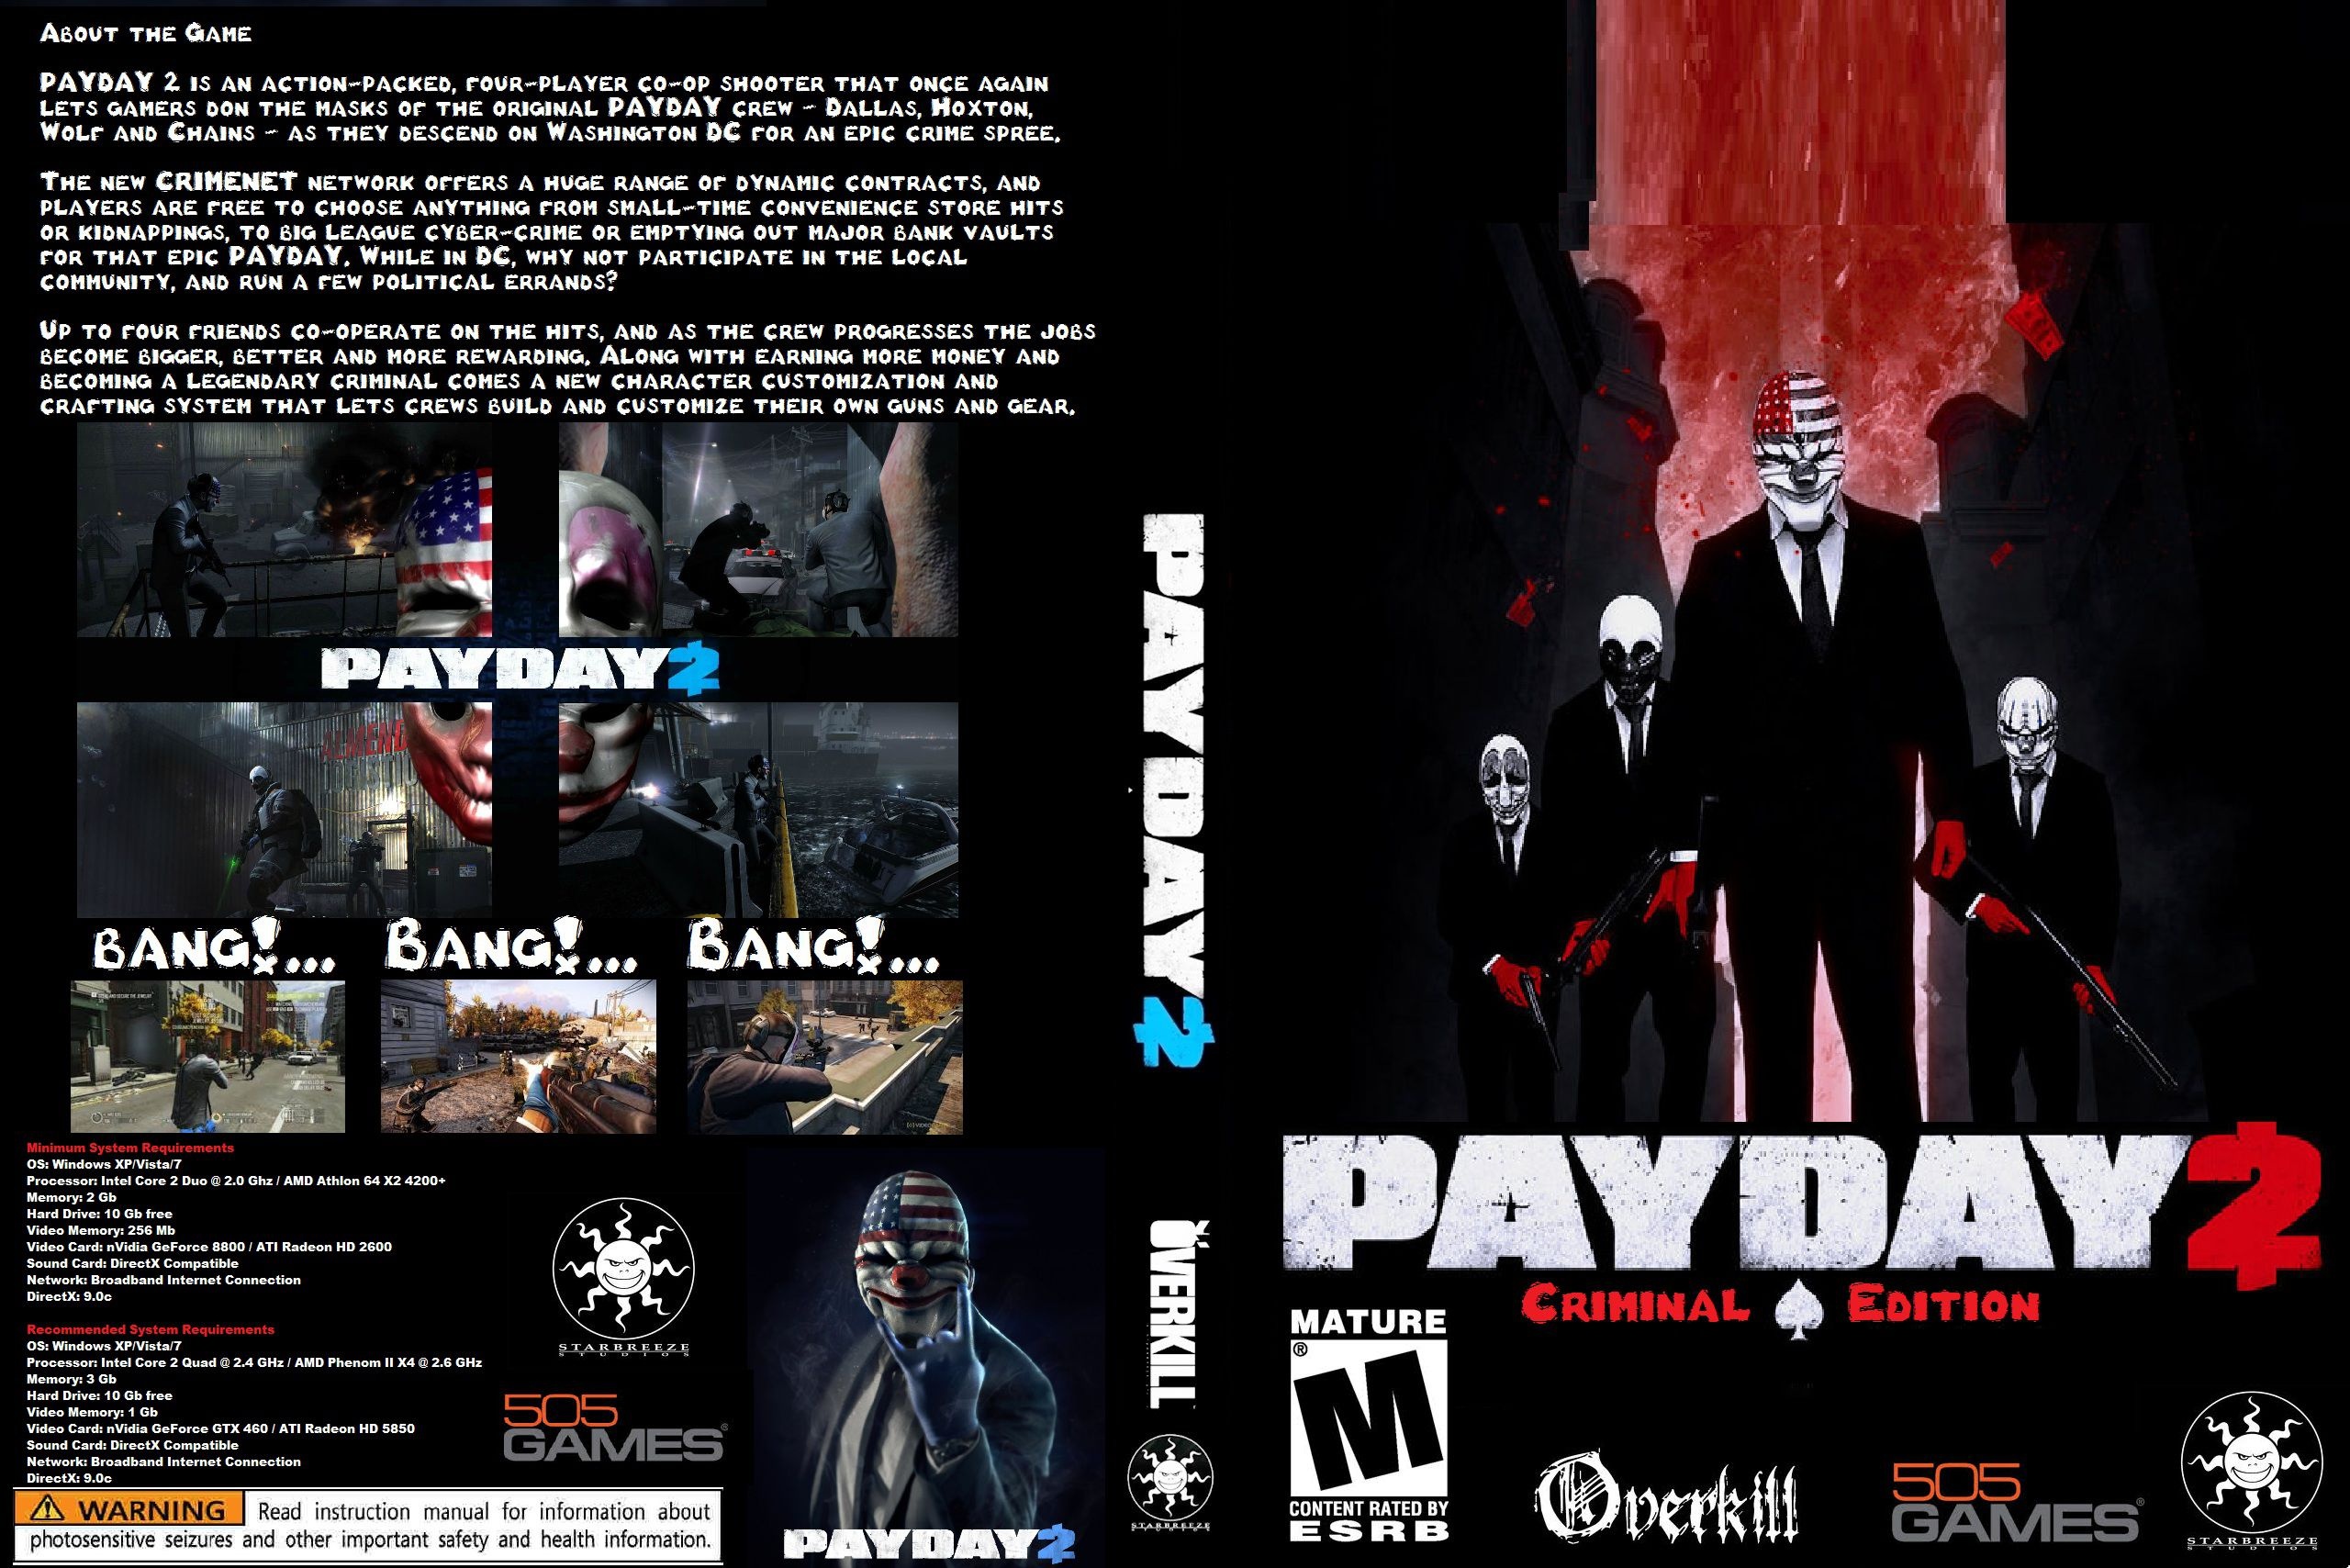 PAYDAY 2 Criminal Edition box cover